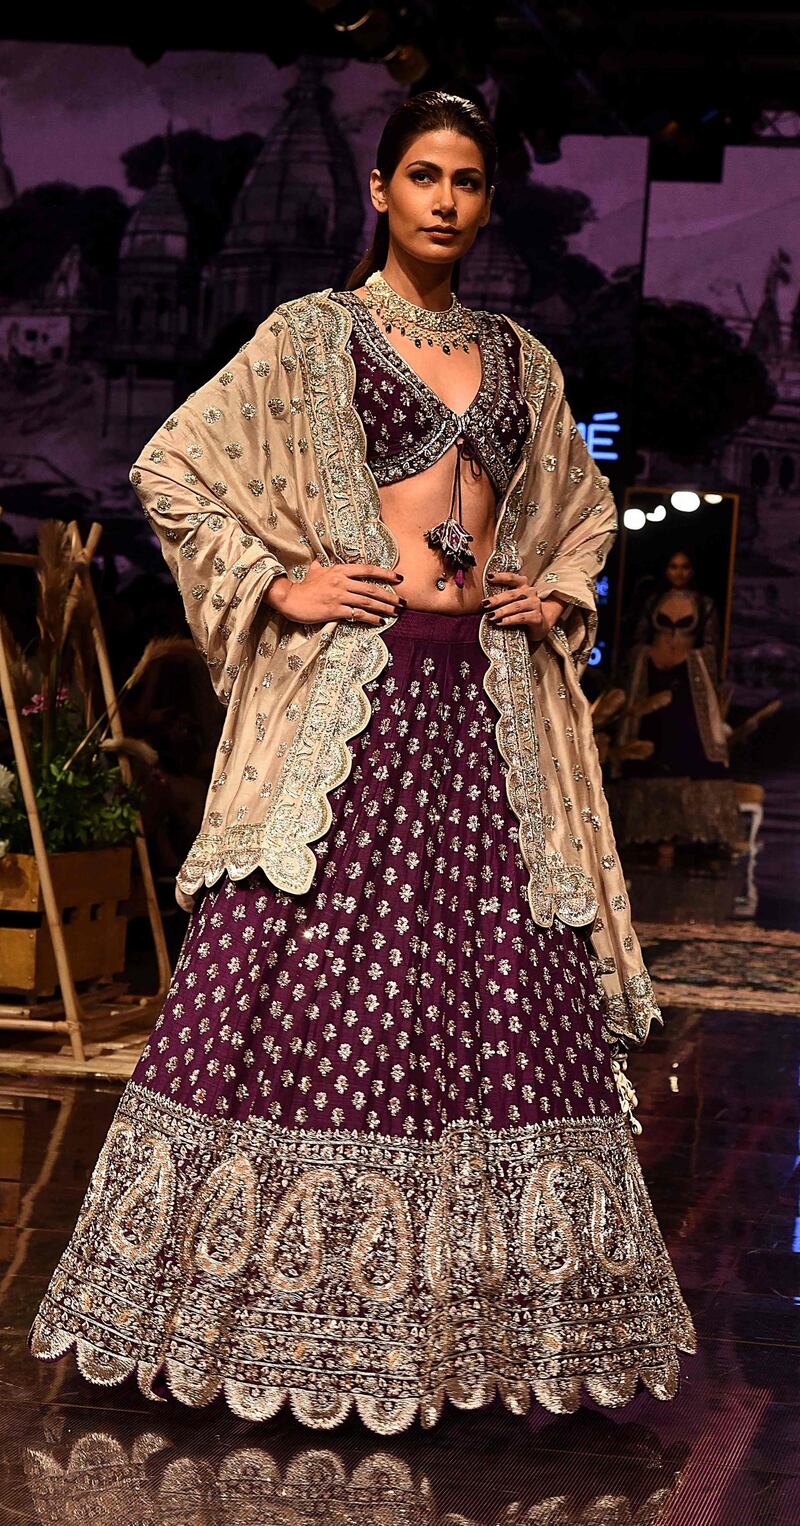 A model presents creations by designer Jayanti Reddy at Lakme Fashion Week (LFW) Winter Festive 2019 in Mumbai on August 23, 2019.  - XGTY / RESTRICTED TO EDITORIAL USE
 / AFP / Sujit Jaiswal / XGTY / RESTRICTED TO EDITORIAL USE
